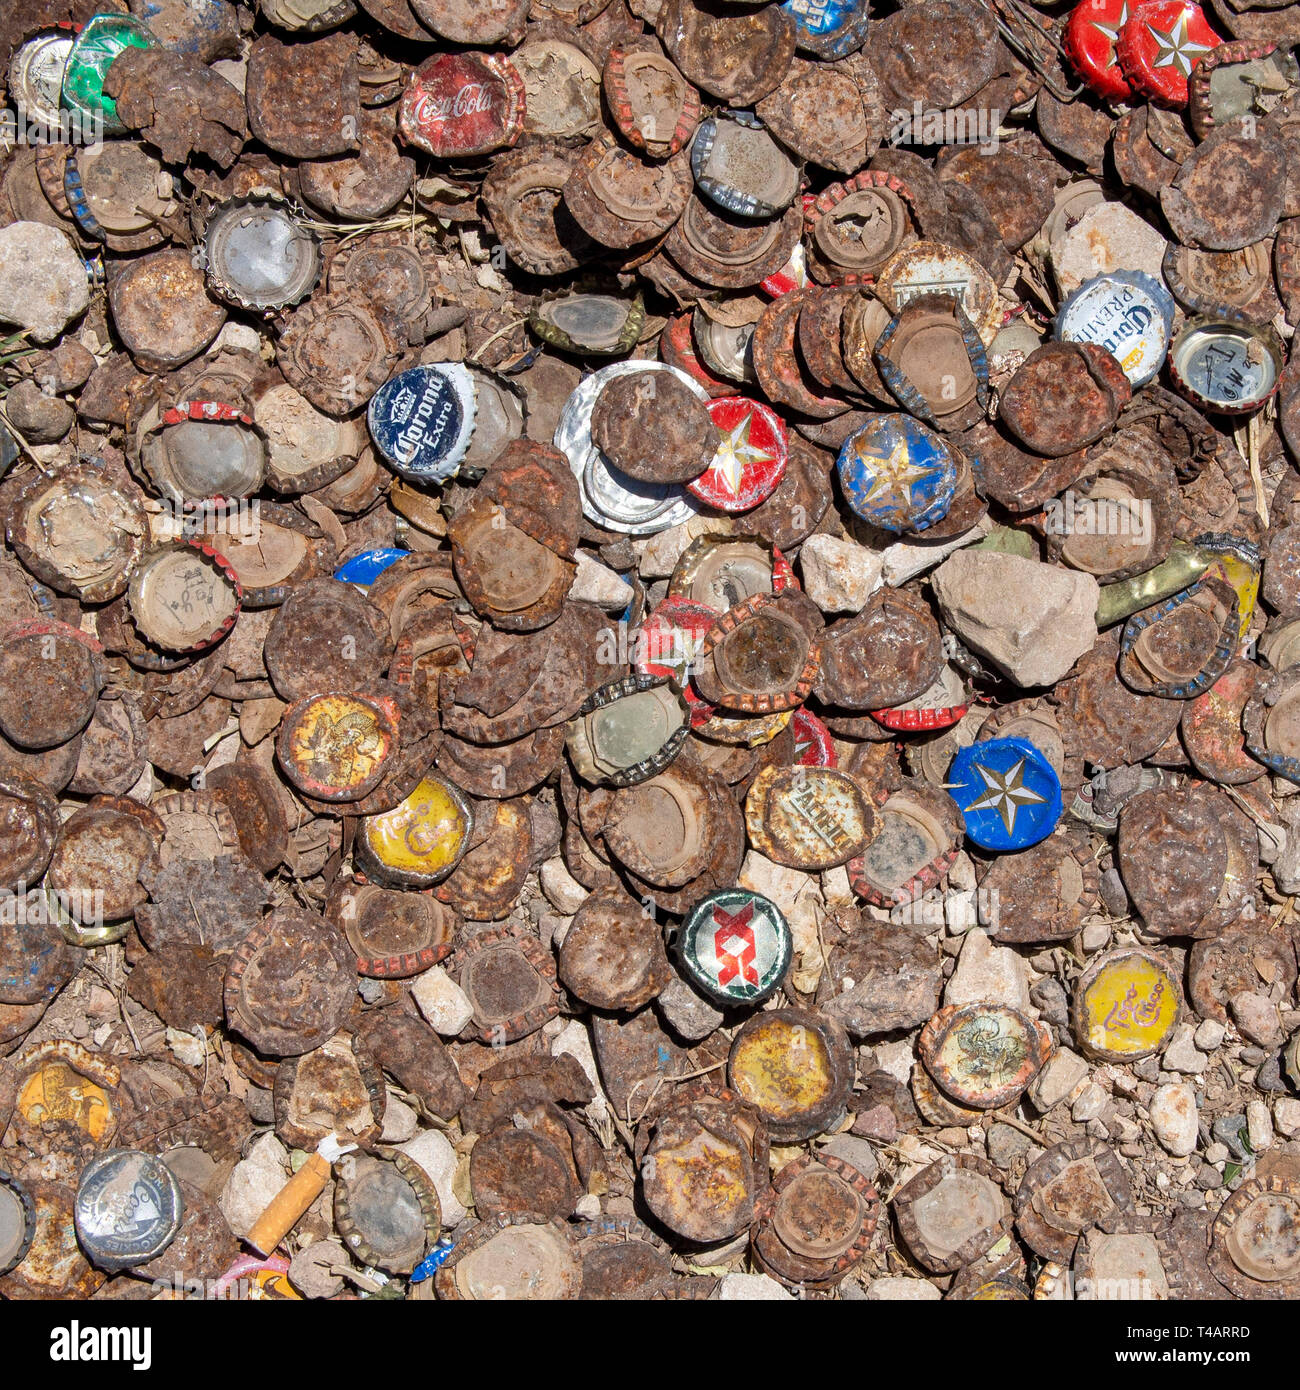 Beer bottles caps covering the backyard of a bar in Marfa, Texas. Stock Photo